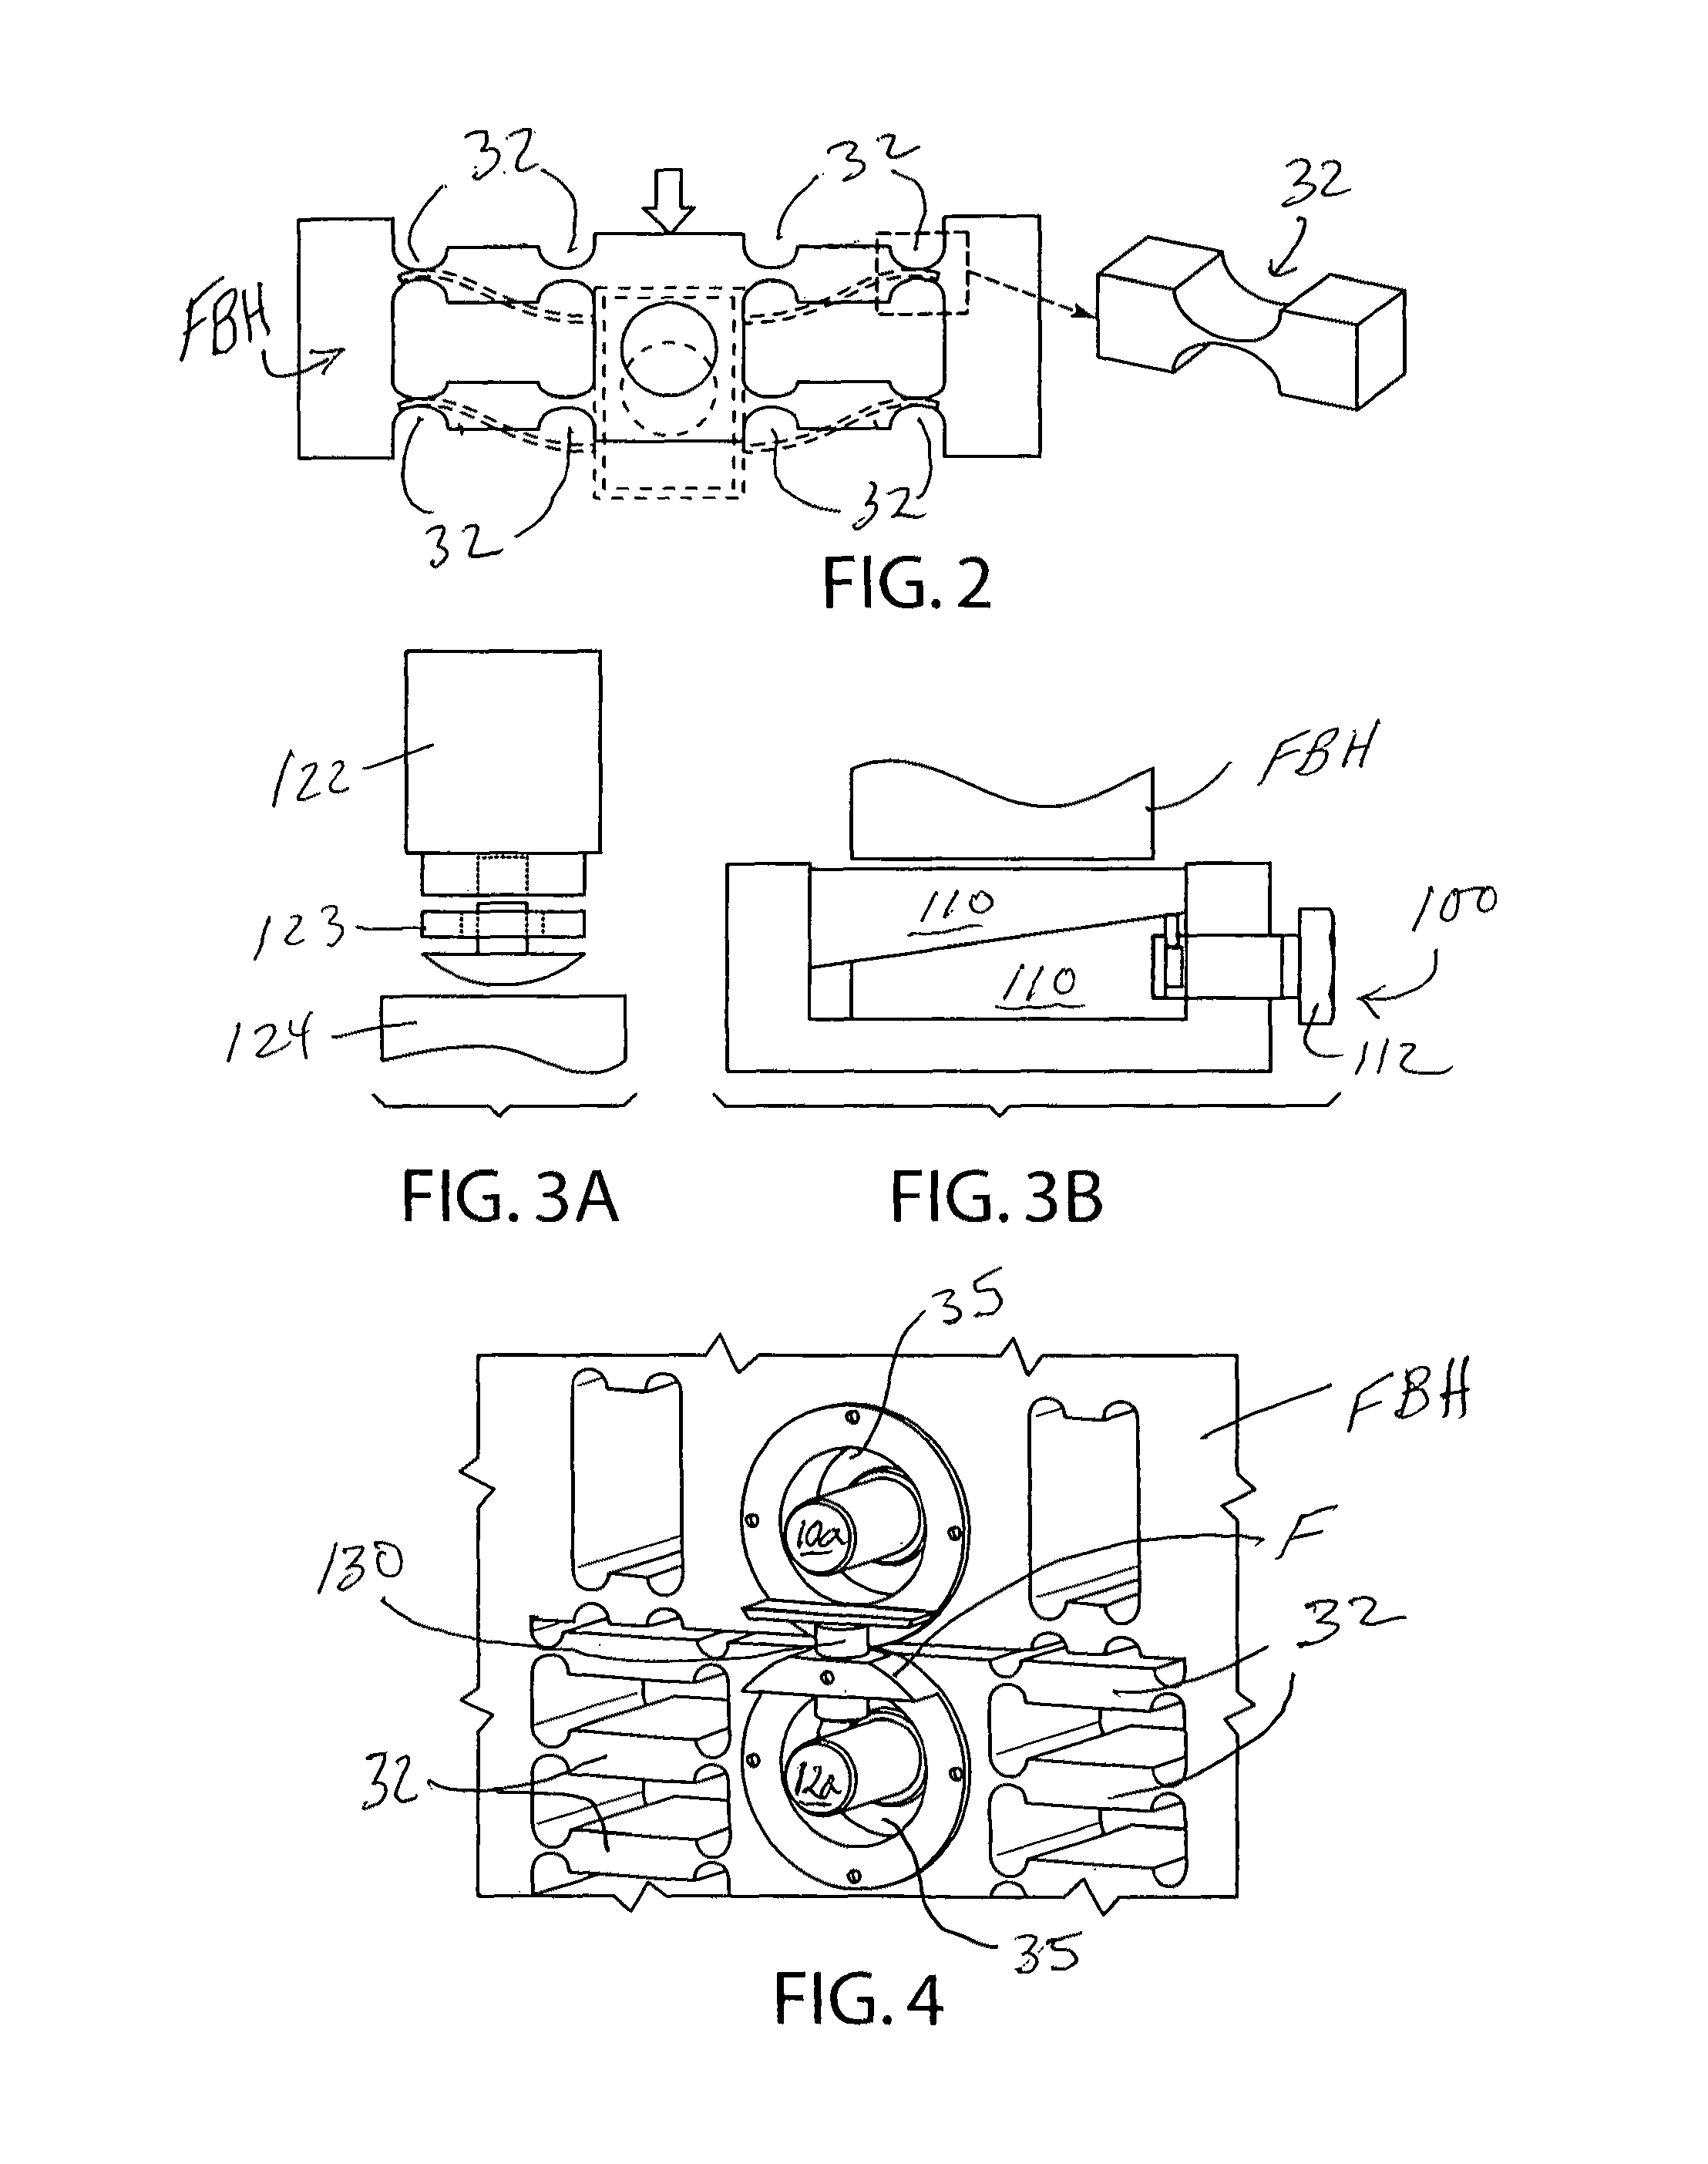 Deformation-based micro surface texturing system